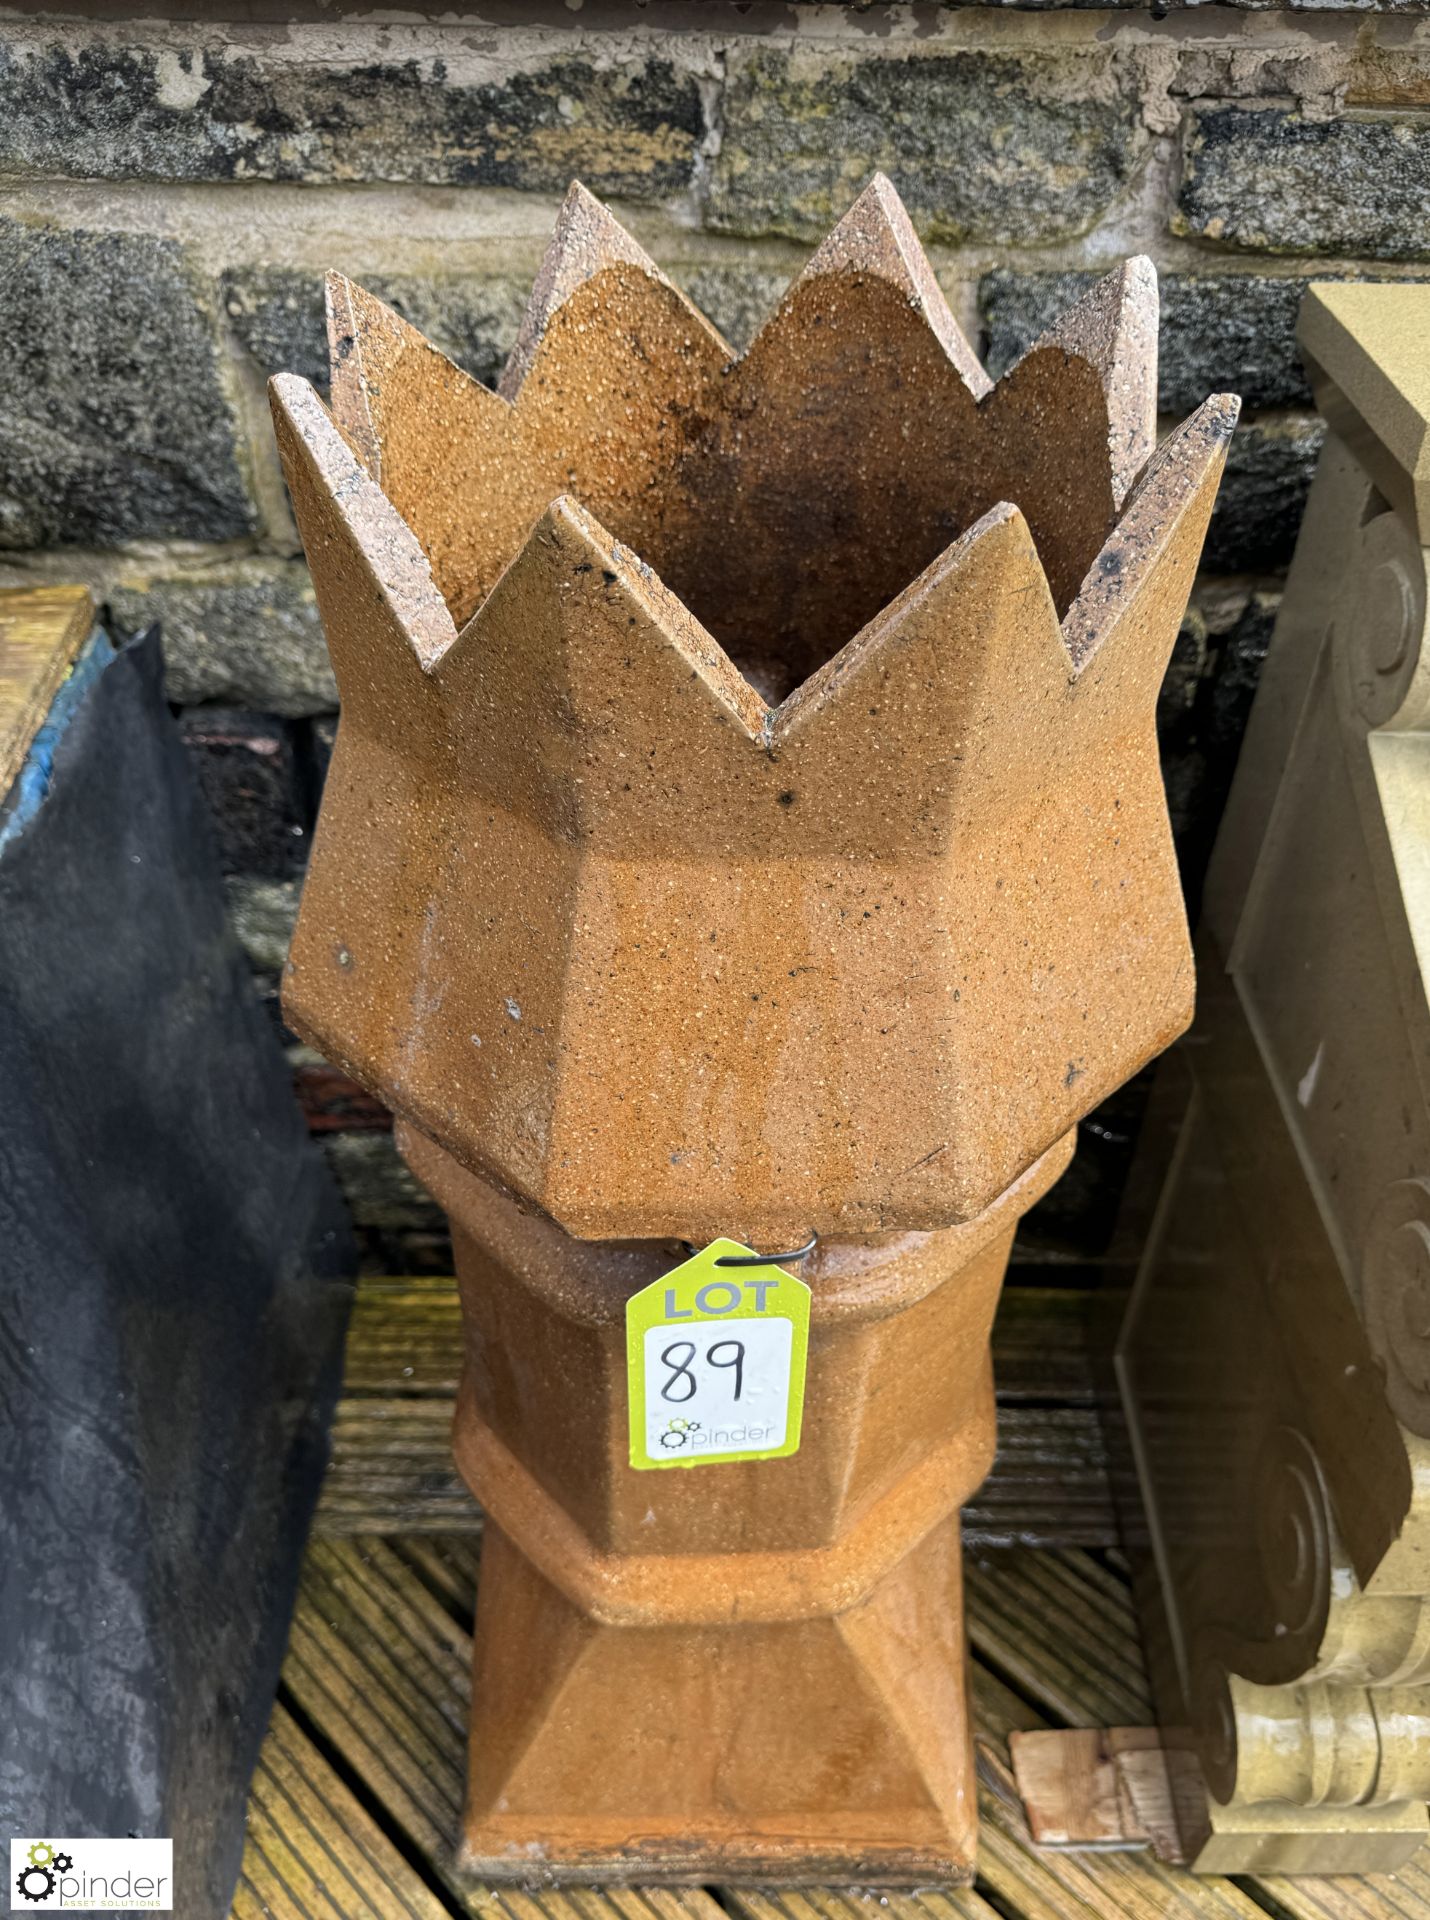 A Victorian round top salt glazed terracotta Chimney Pot, approx. 39in - Image 3 of 5